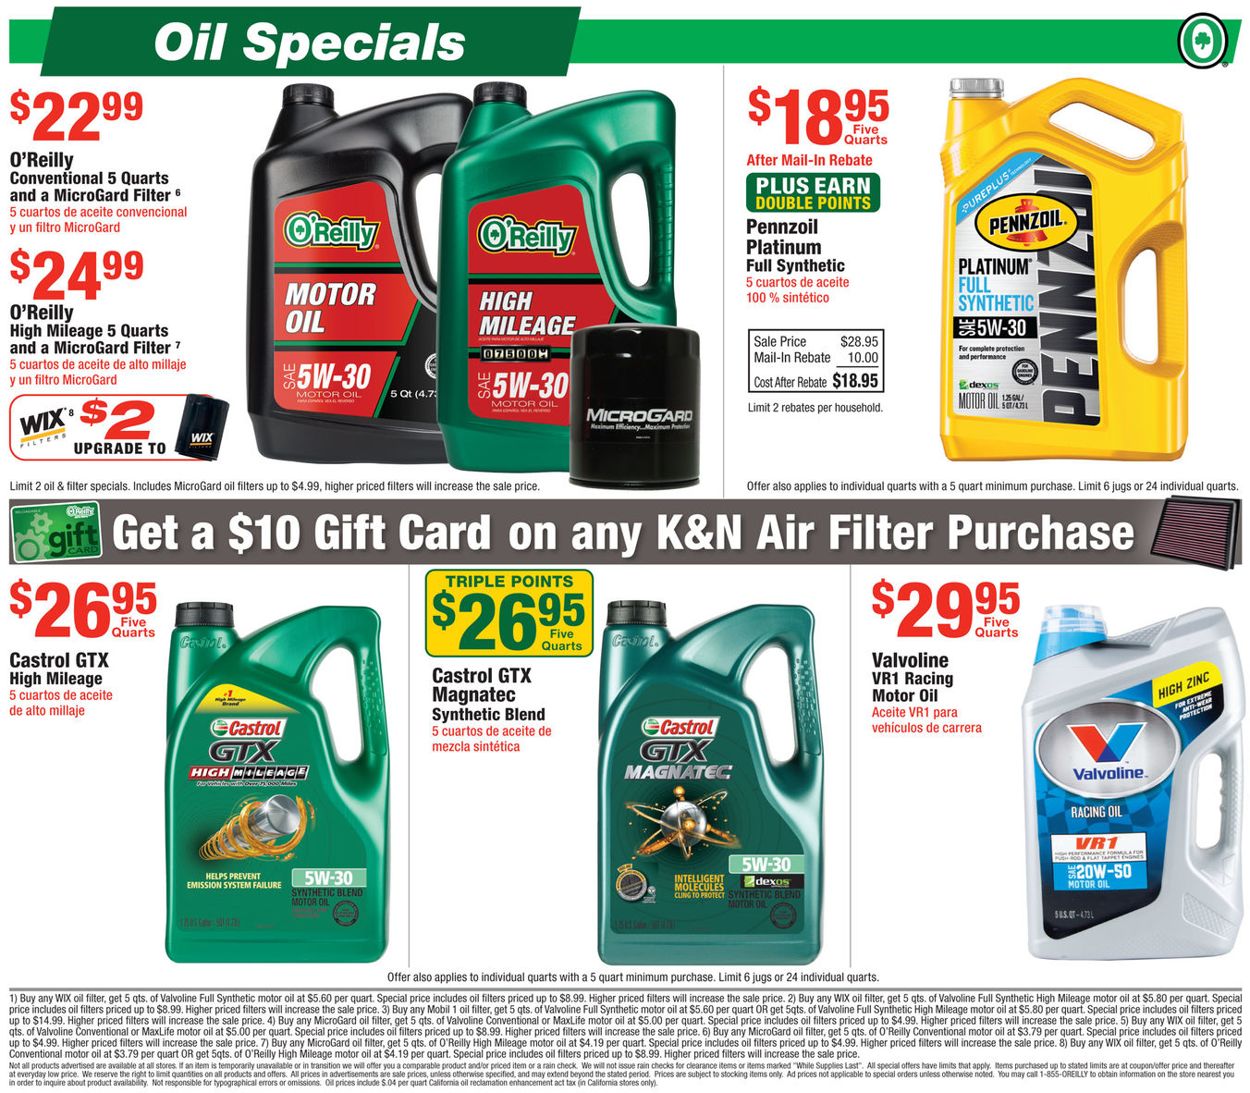 o-reilly-auto-parts-current-weekly-ad-03-25-04-28-2020-12